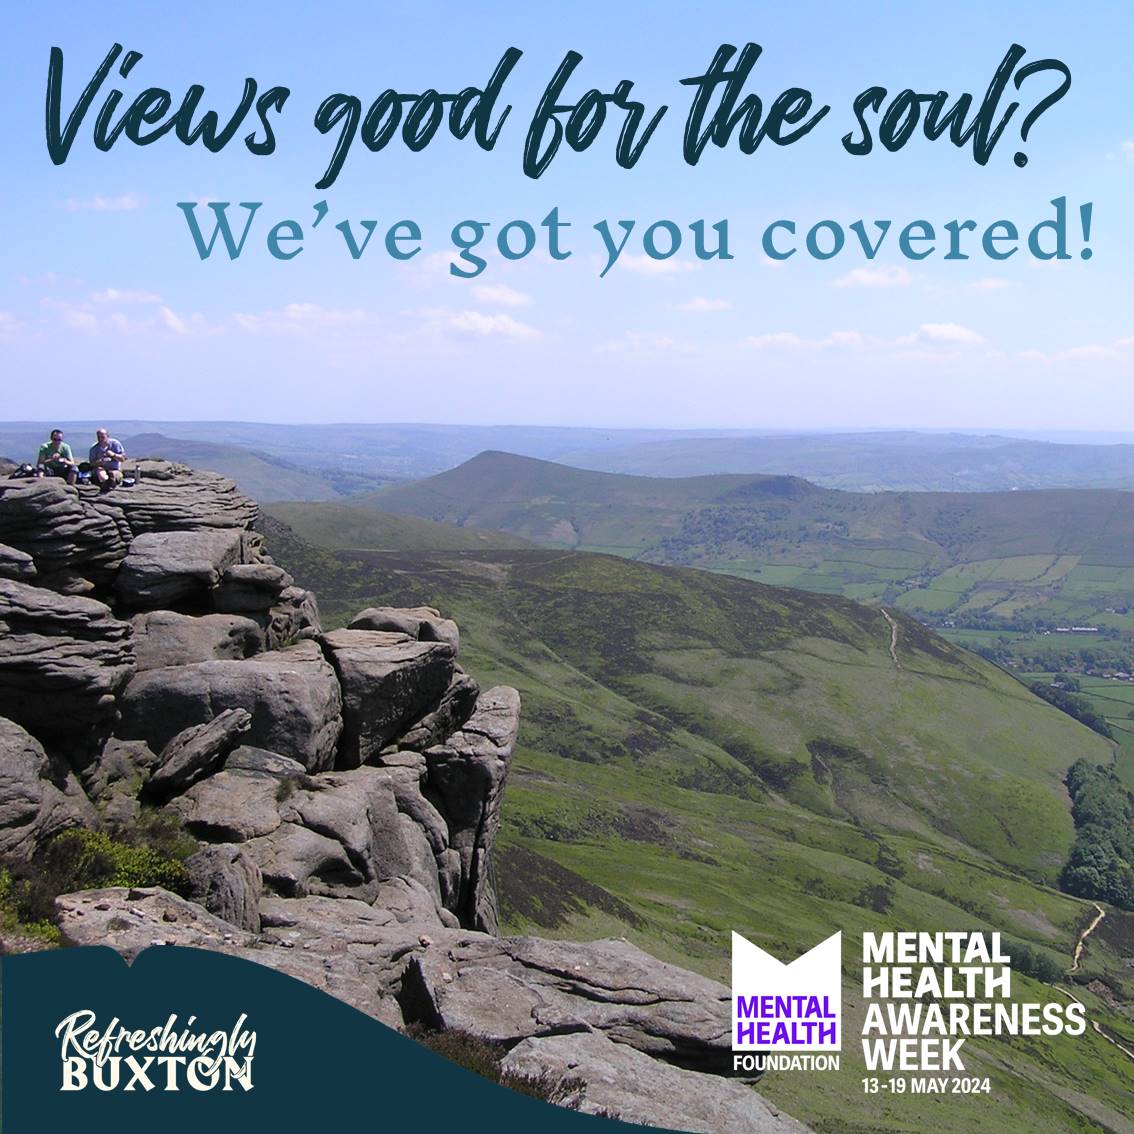 It’s #MentalHealthAwarenessWeek

Looking for a view to soothe your soul? 

We have stunning views from every hilltop 🤩 #PeakDistrictNationalPark

#MHAW2024 #Buxton #HighPeak #PeakDistrict #Derbyshire #SK17 #RefreshinglyBuxton #VisitBuxton
@vpdd  @mentalhealth @BuxtonGrapevine